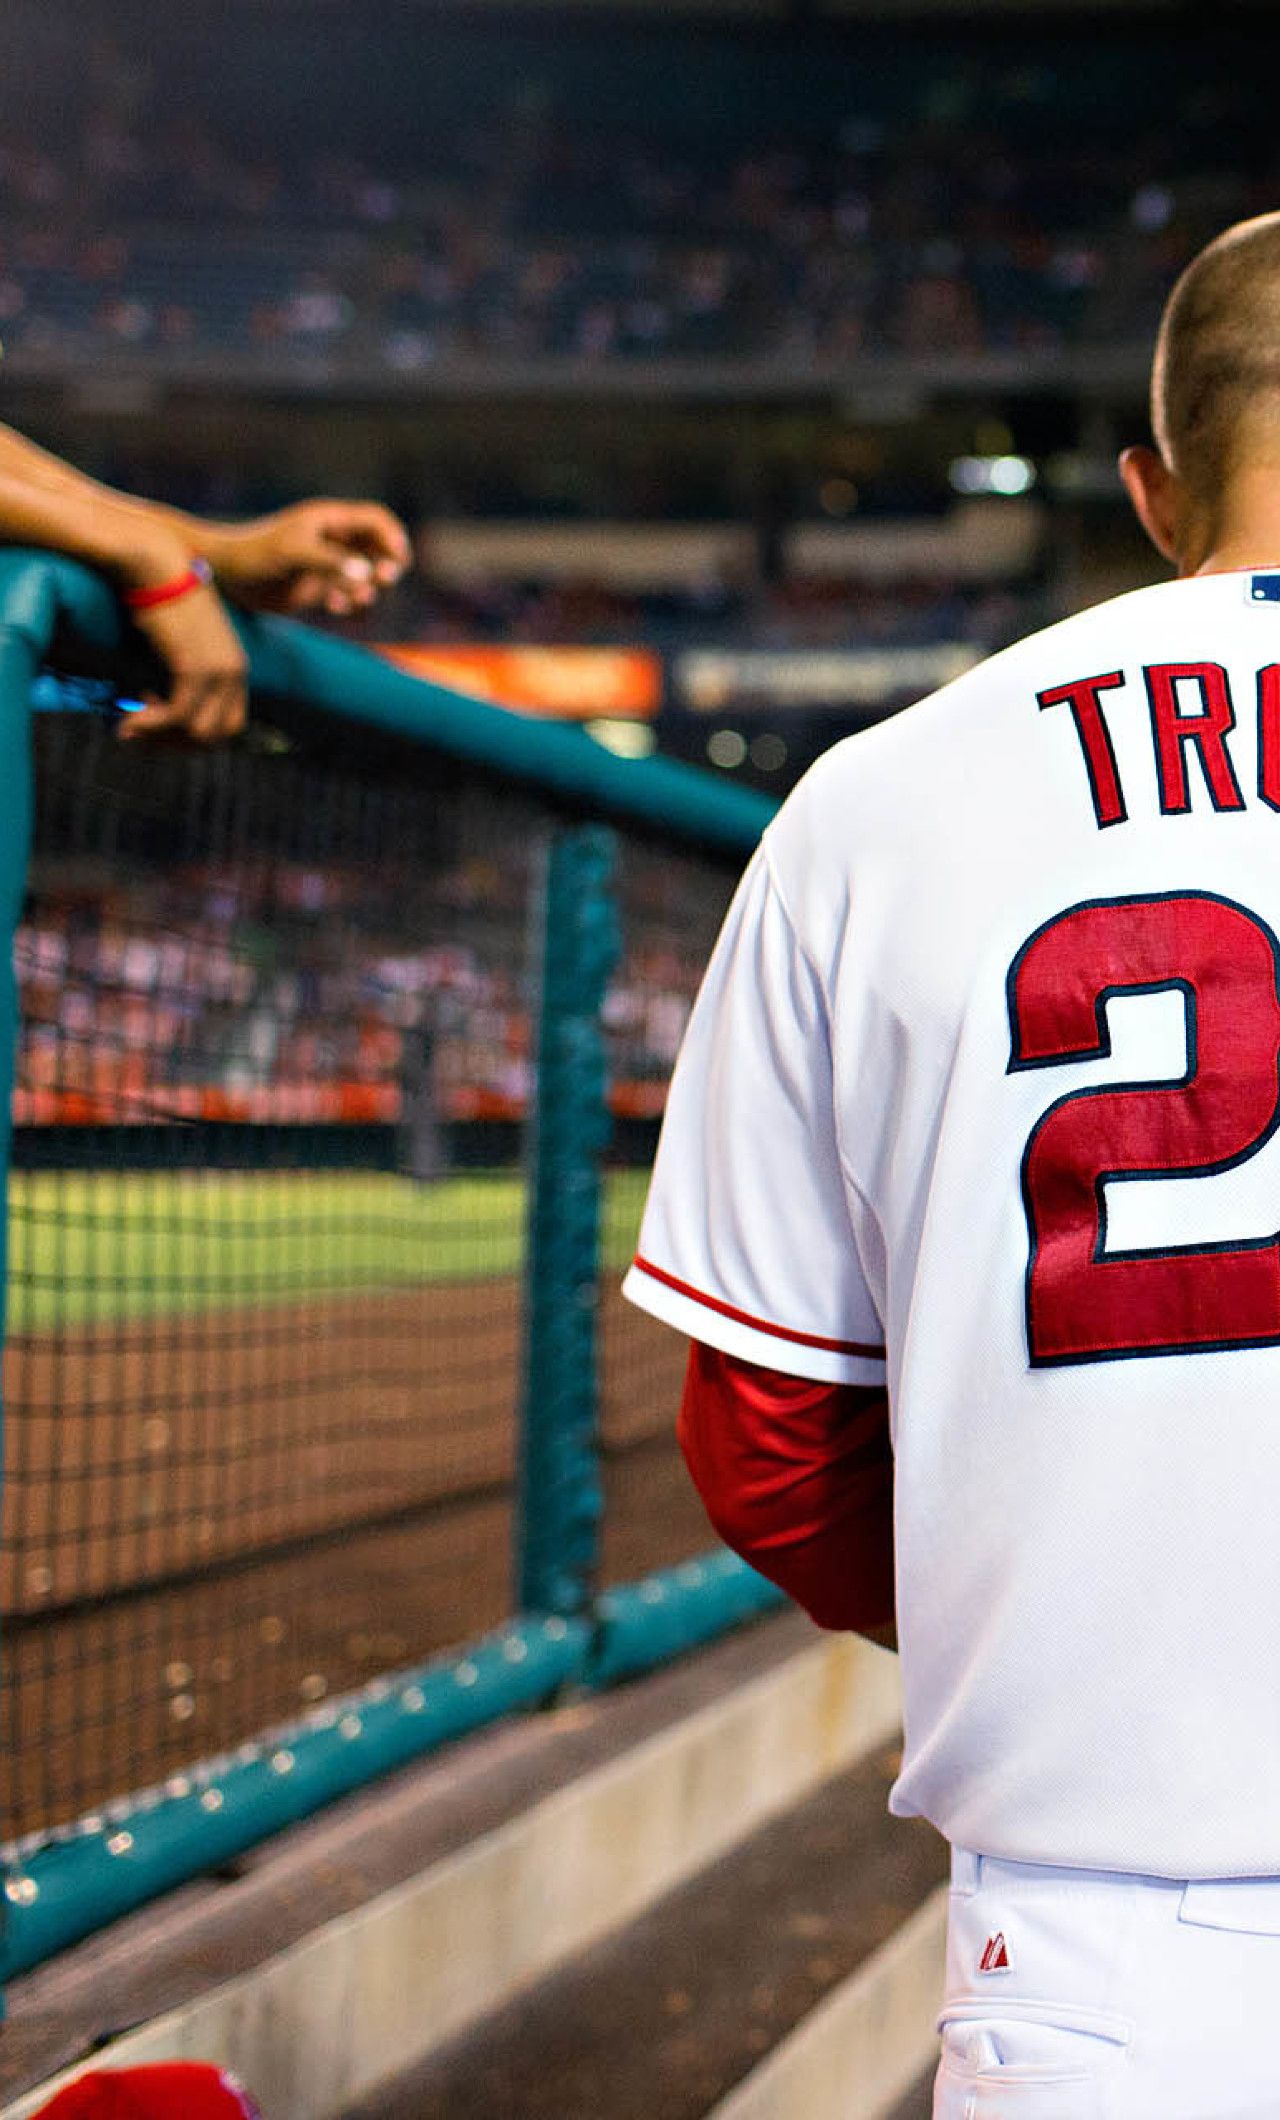 Mike Trout iPhone, Baseball Players HD phone wallpaper